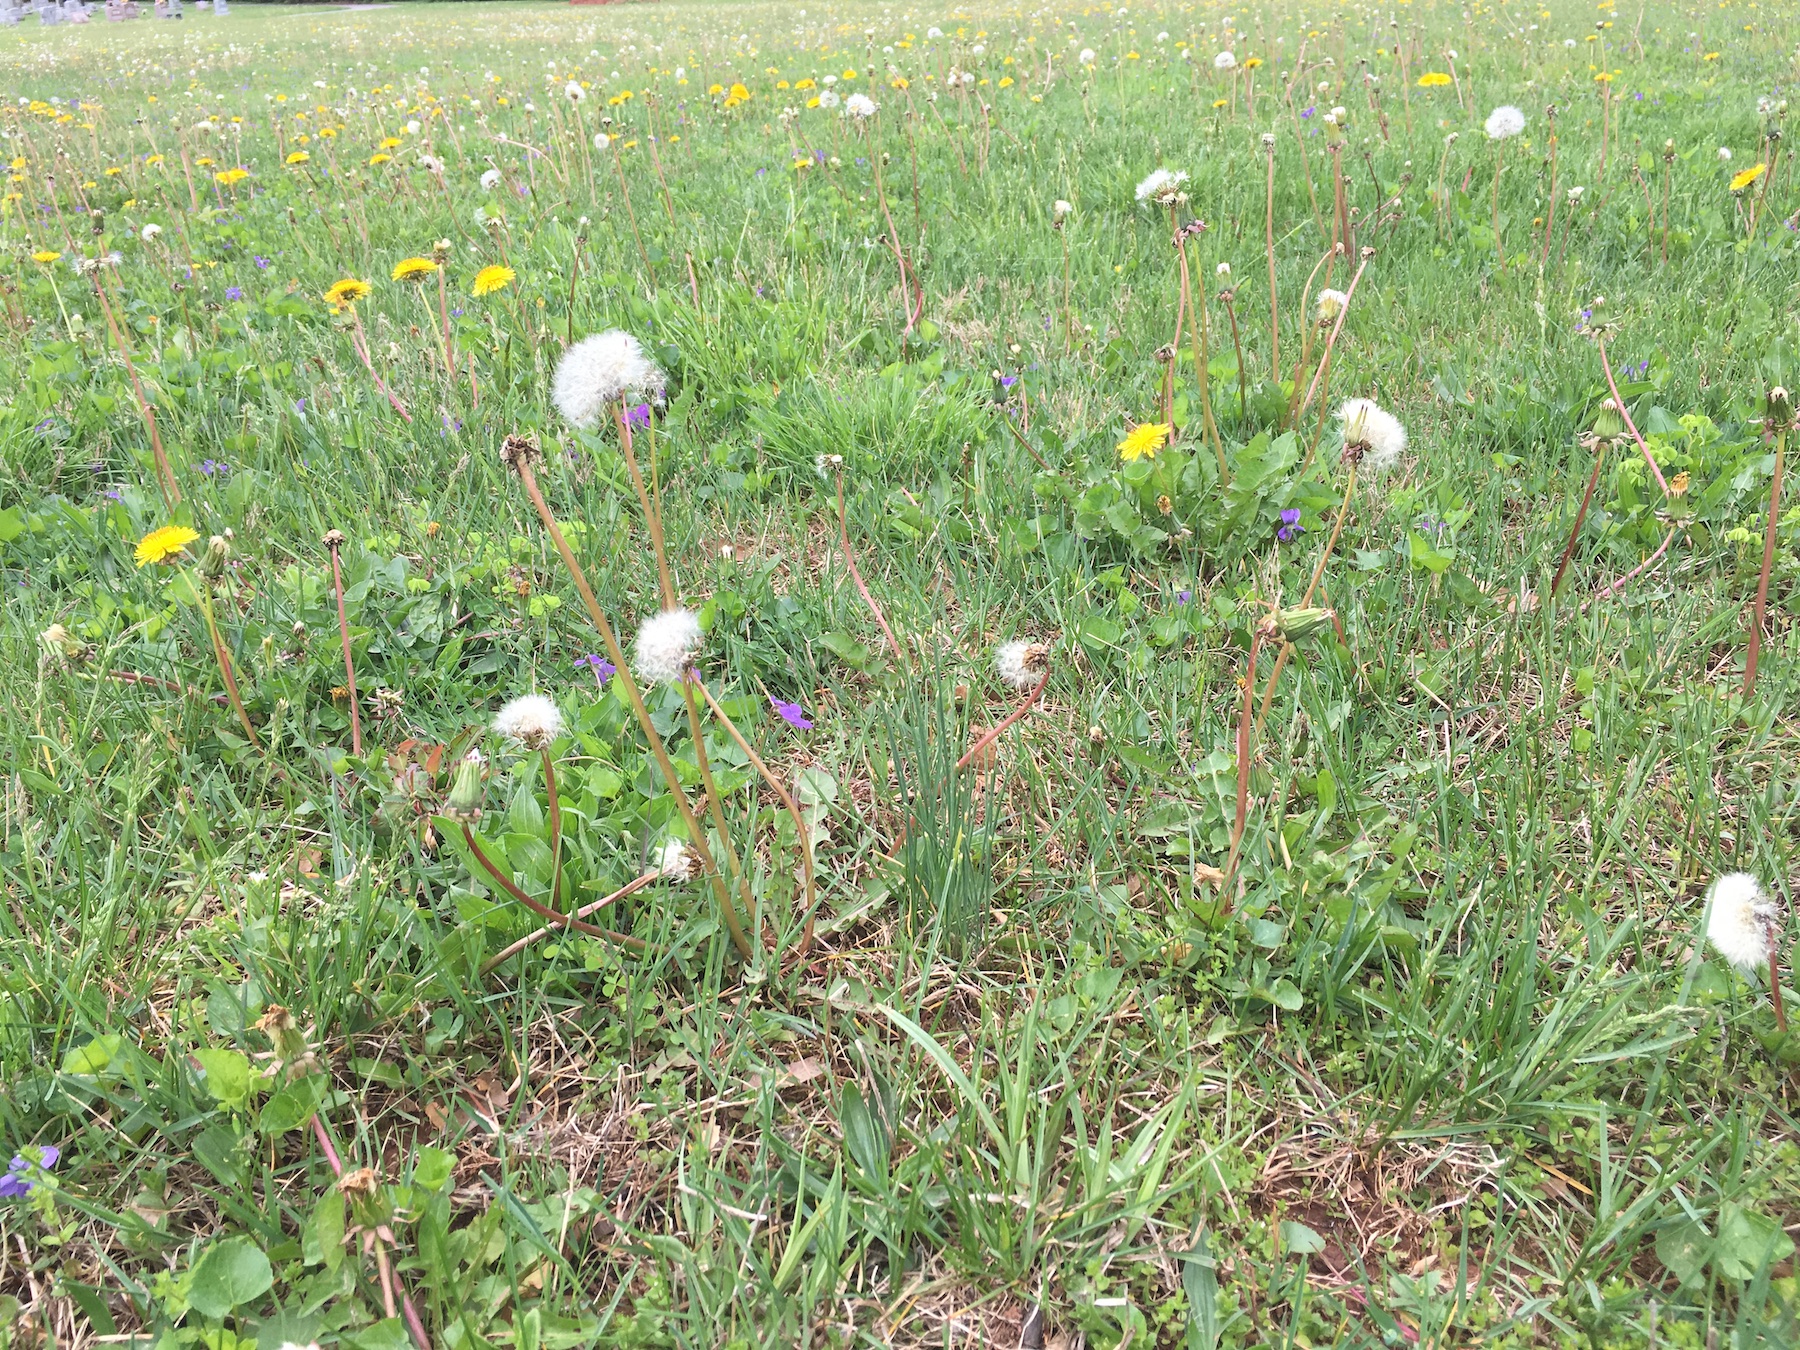 grass with dandelions and weeds